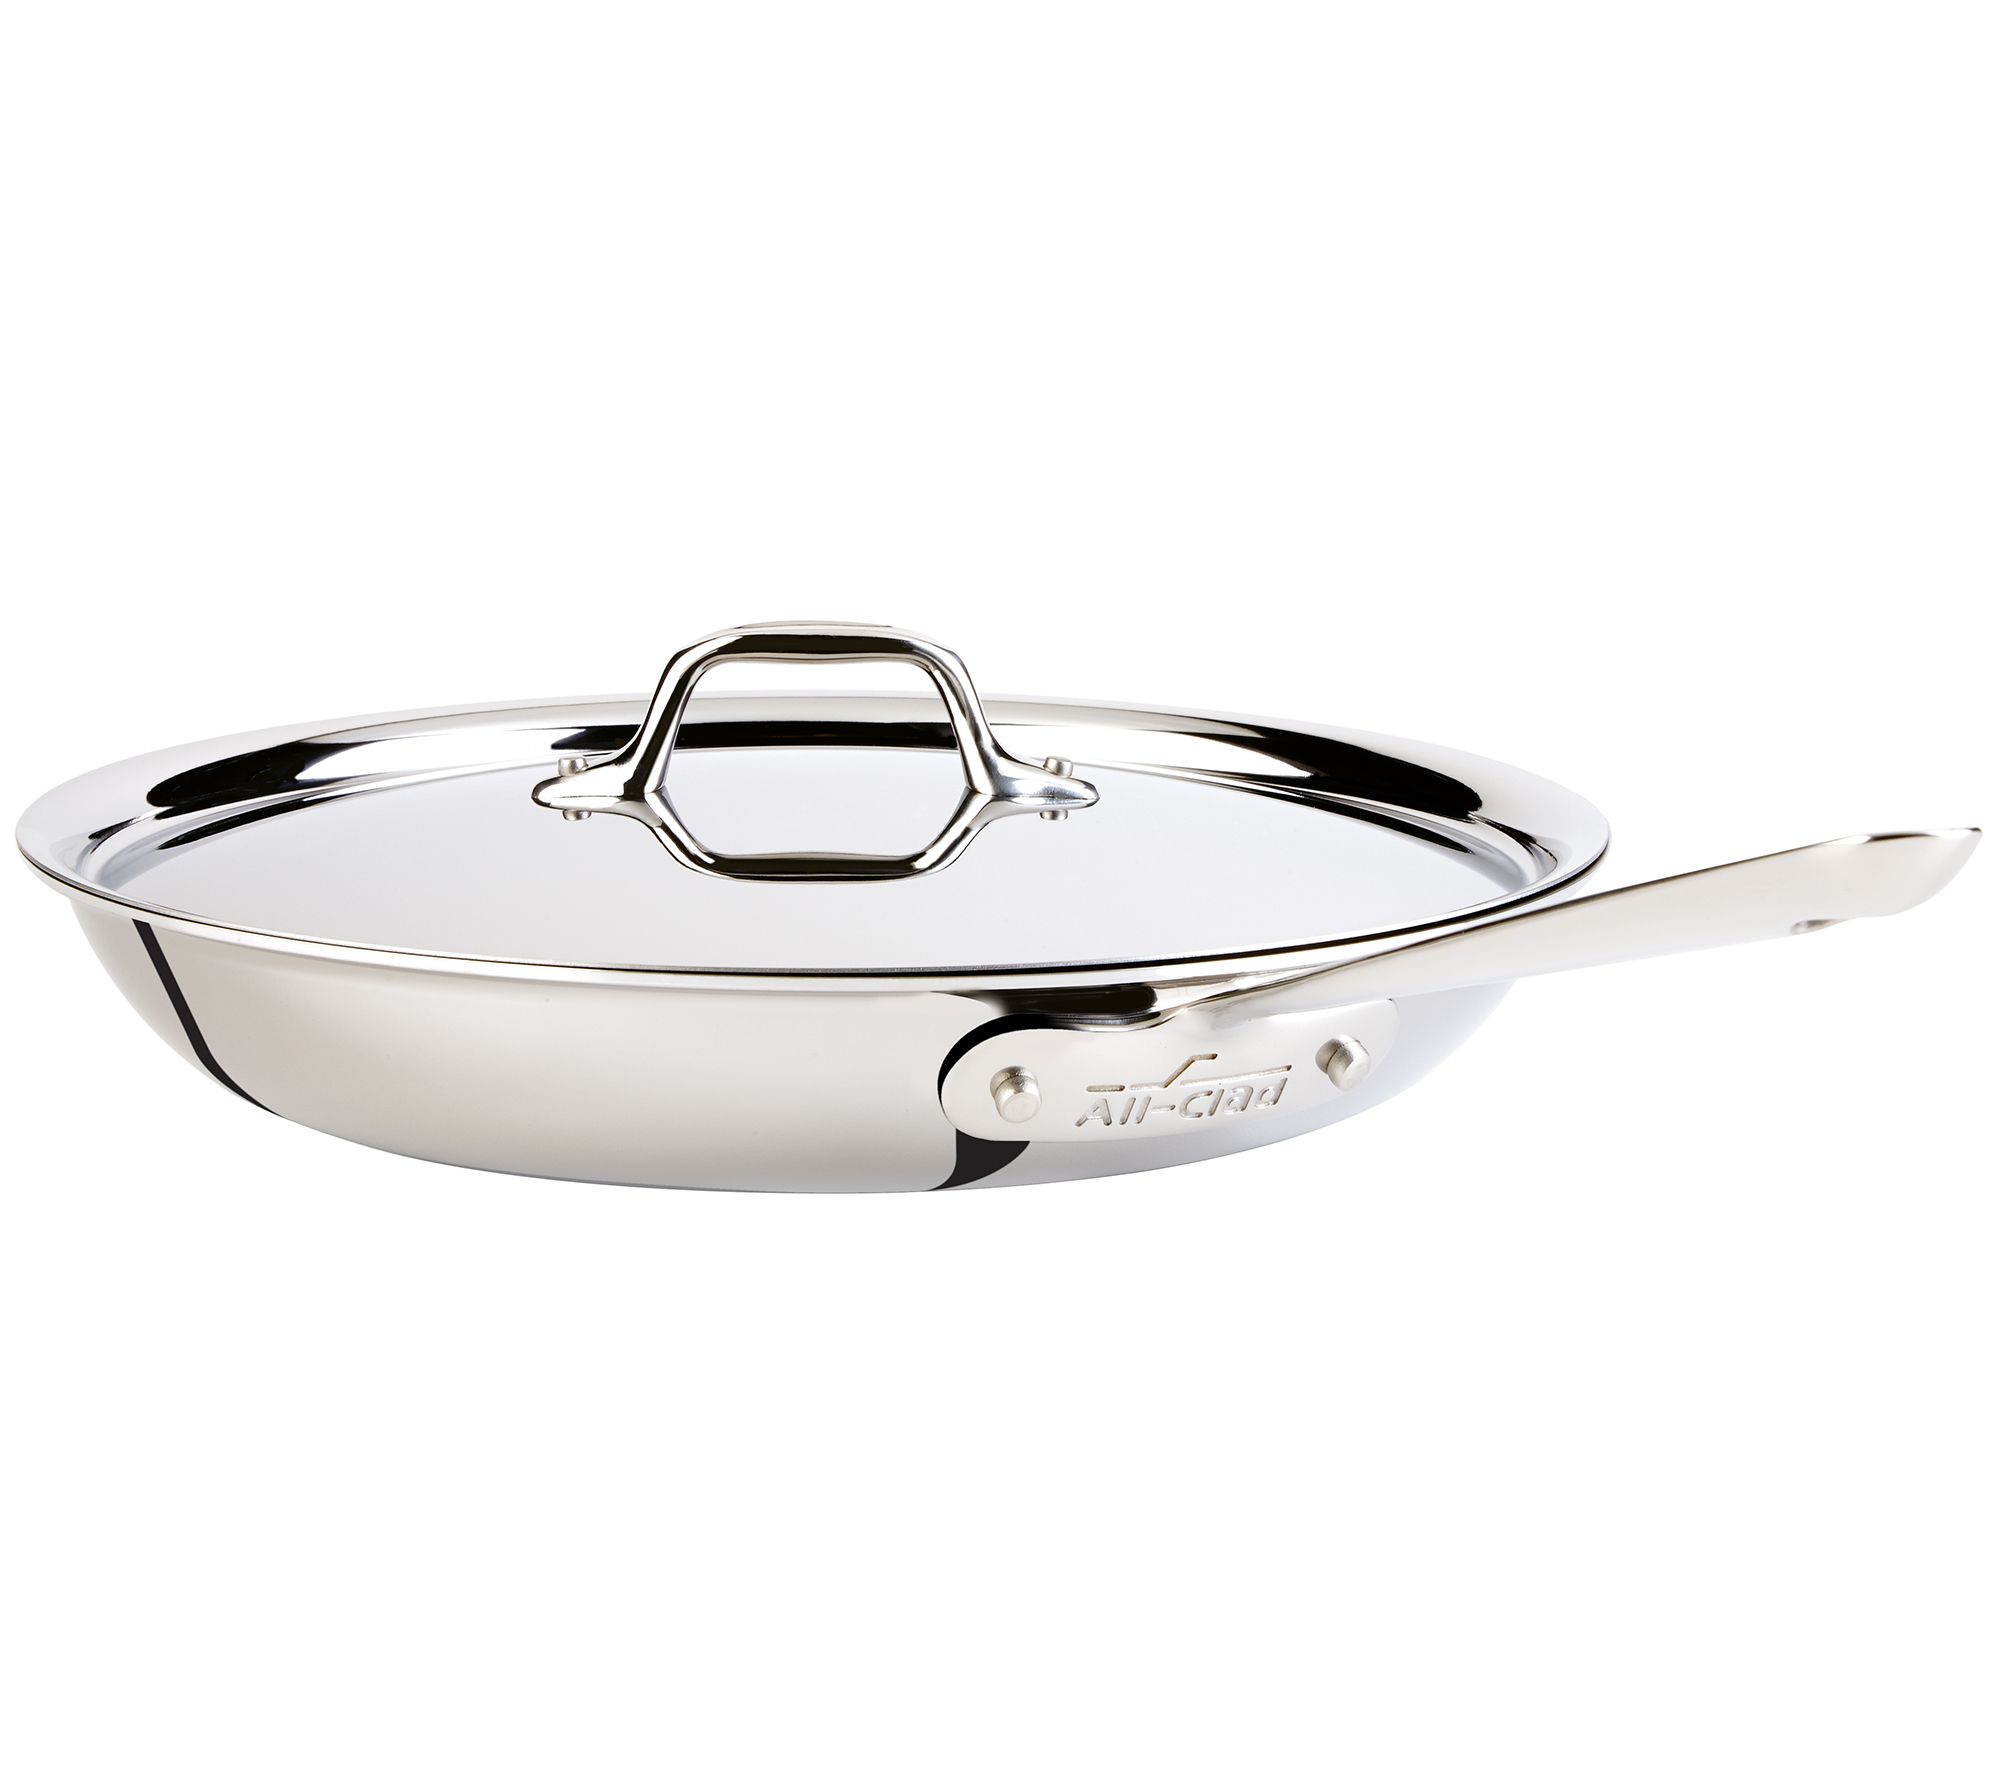 All-Clad Stainless Steel 12 Covered Fry Pan 